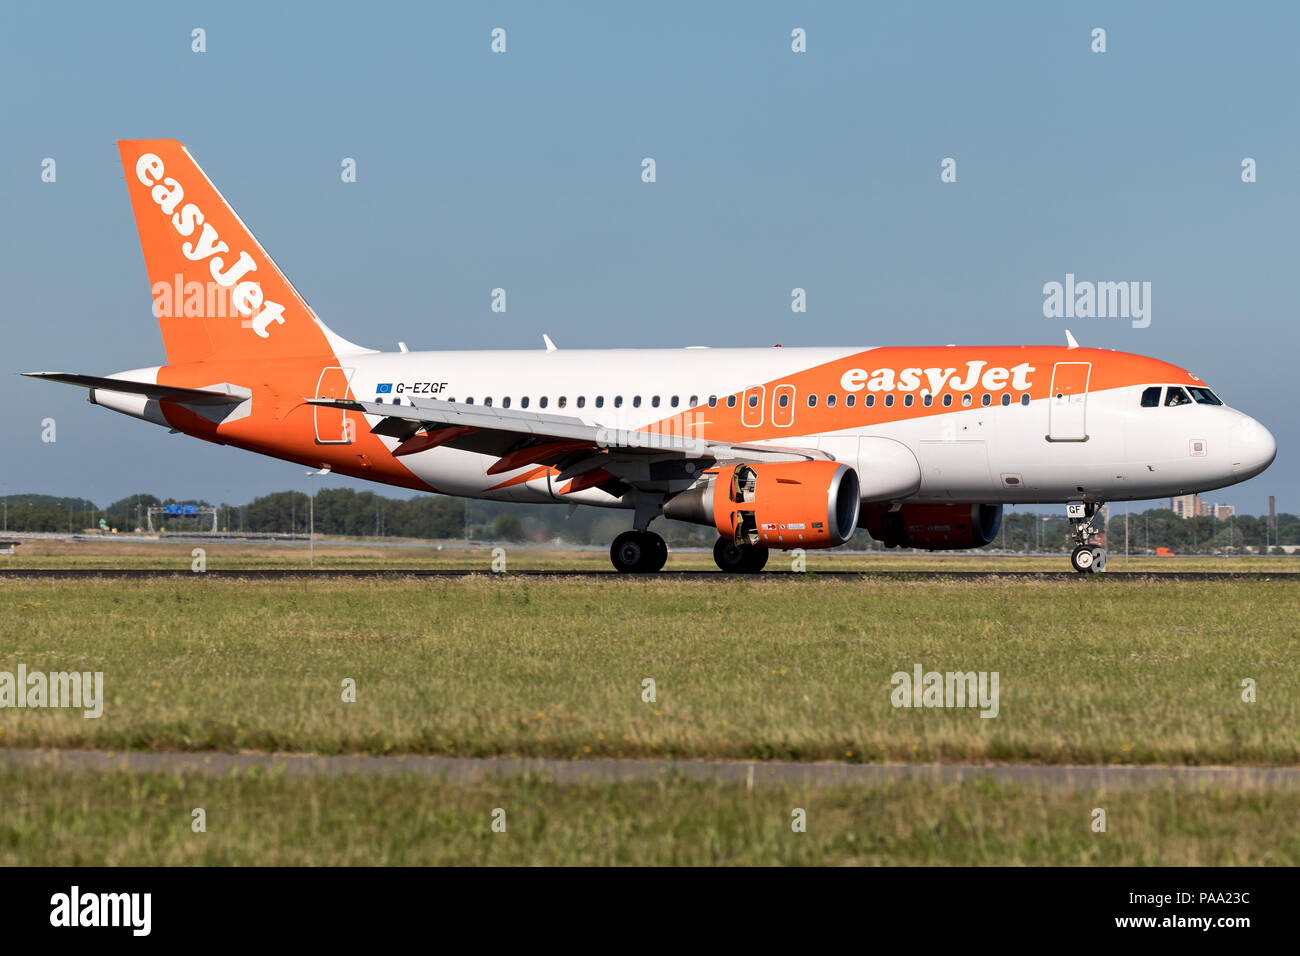 British easyJet Airbus A319-100 with registration G-EZGF just landed on runway 18R (Polderbaan) of Amsterdam Airport Schiphol. Stock Photo